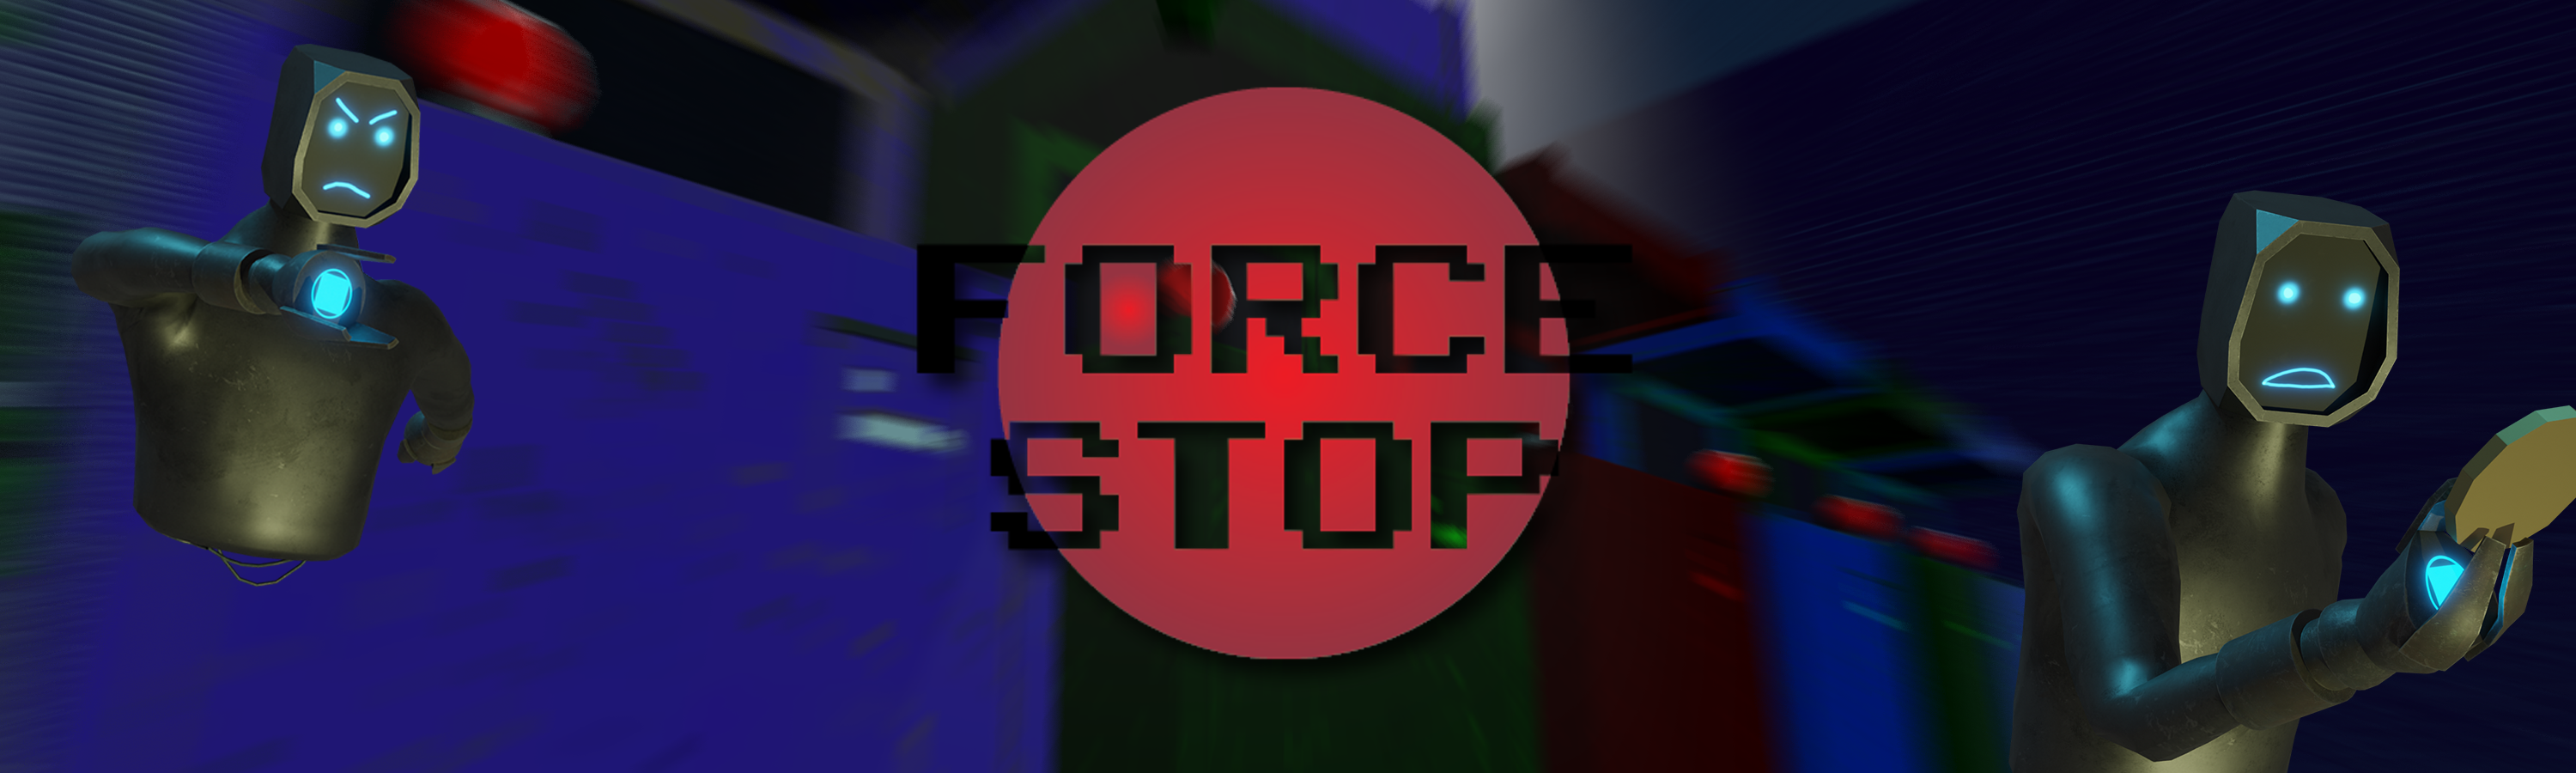 Force Stop OST